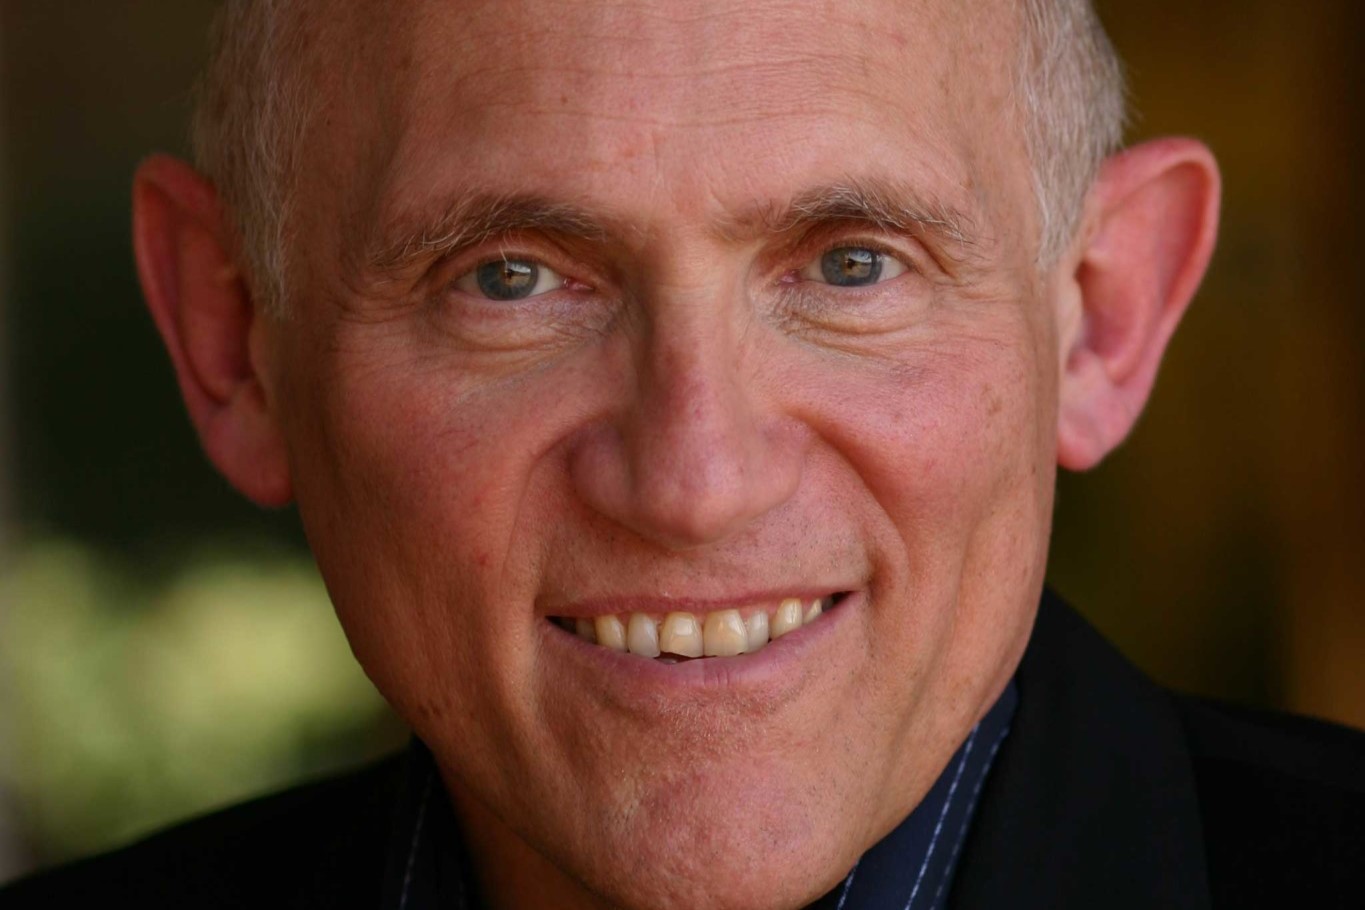 19-surprising-facts-about-armin-shimerman